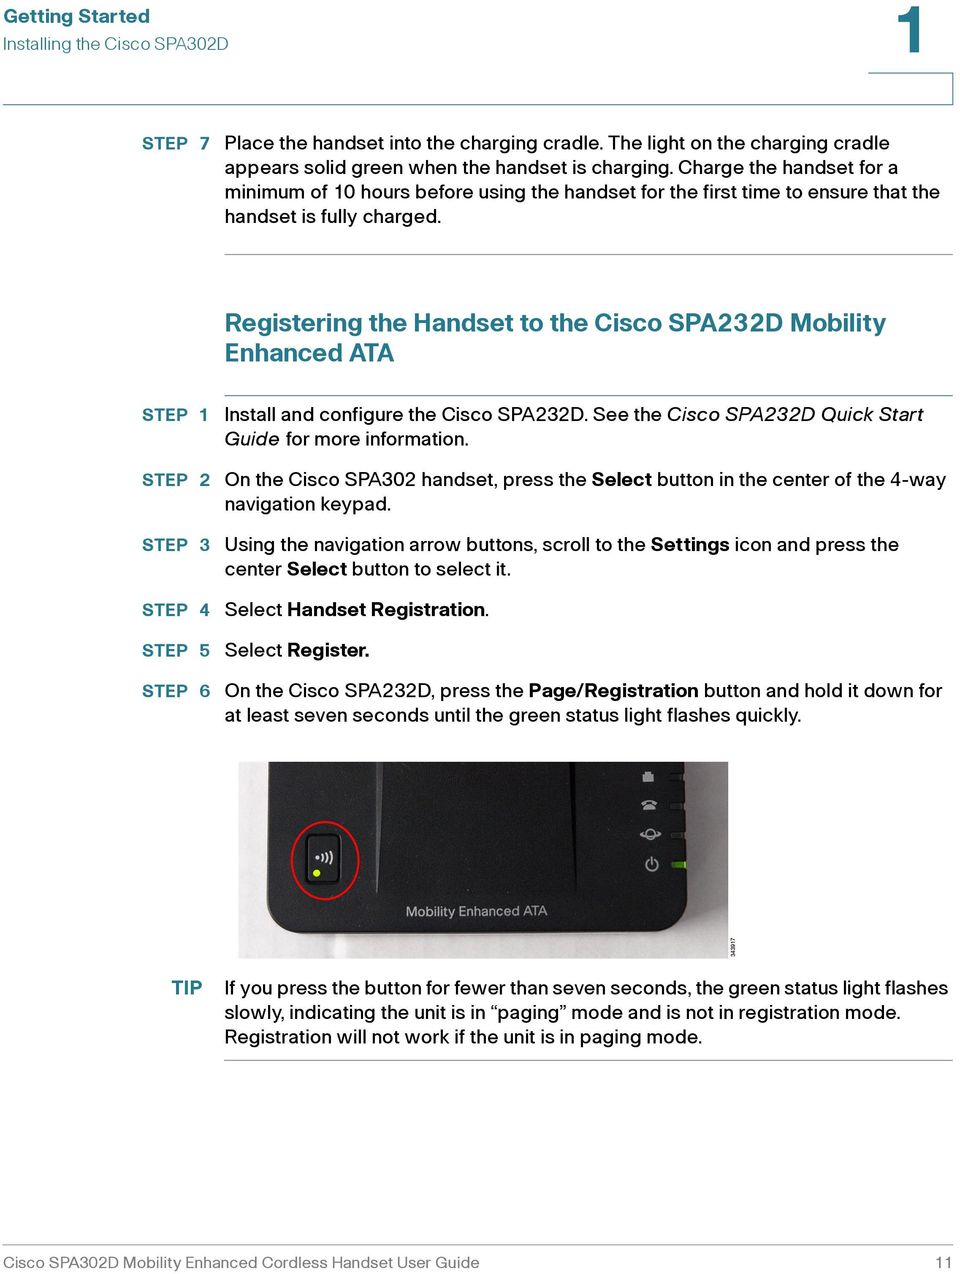 Registering the Handset to the Cisco SPA3D Mobility Enhanced ATA STEP 4 STEP 5 STEP 6 Install and configure the Cisco SPA3D. See the Cisco SPA3D Quick Start Guide for more information.